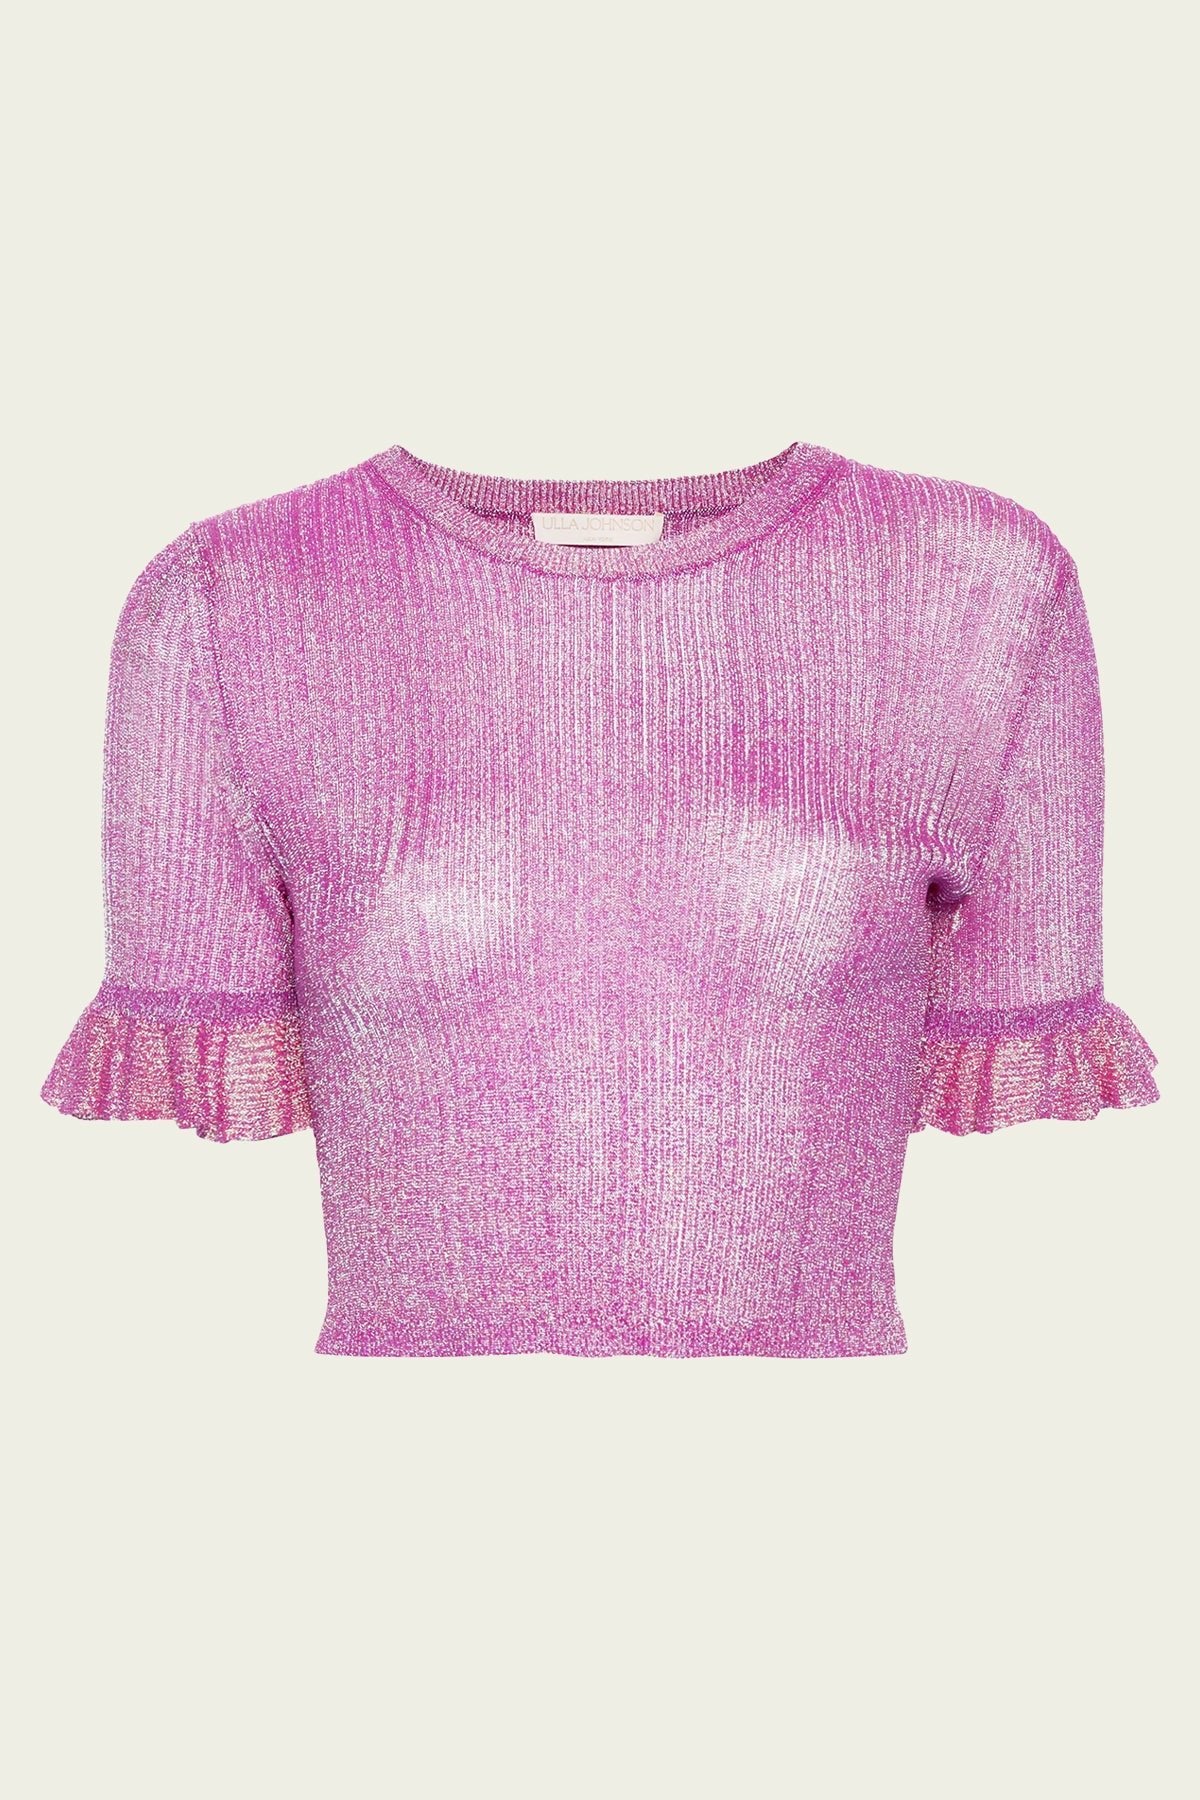 Patti Knitted Crop Top in Pink Opal - shop-olivia.com